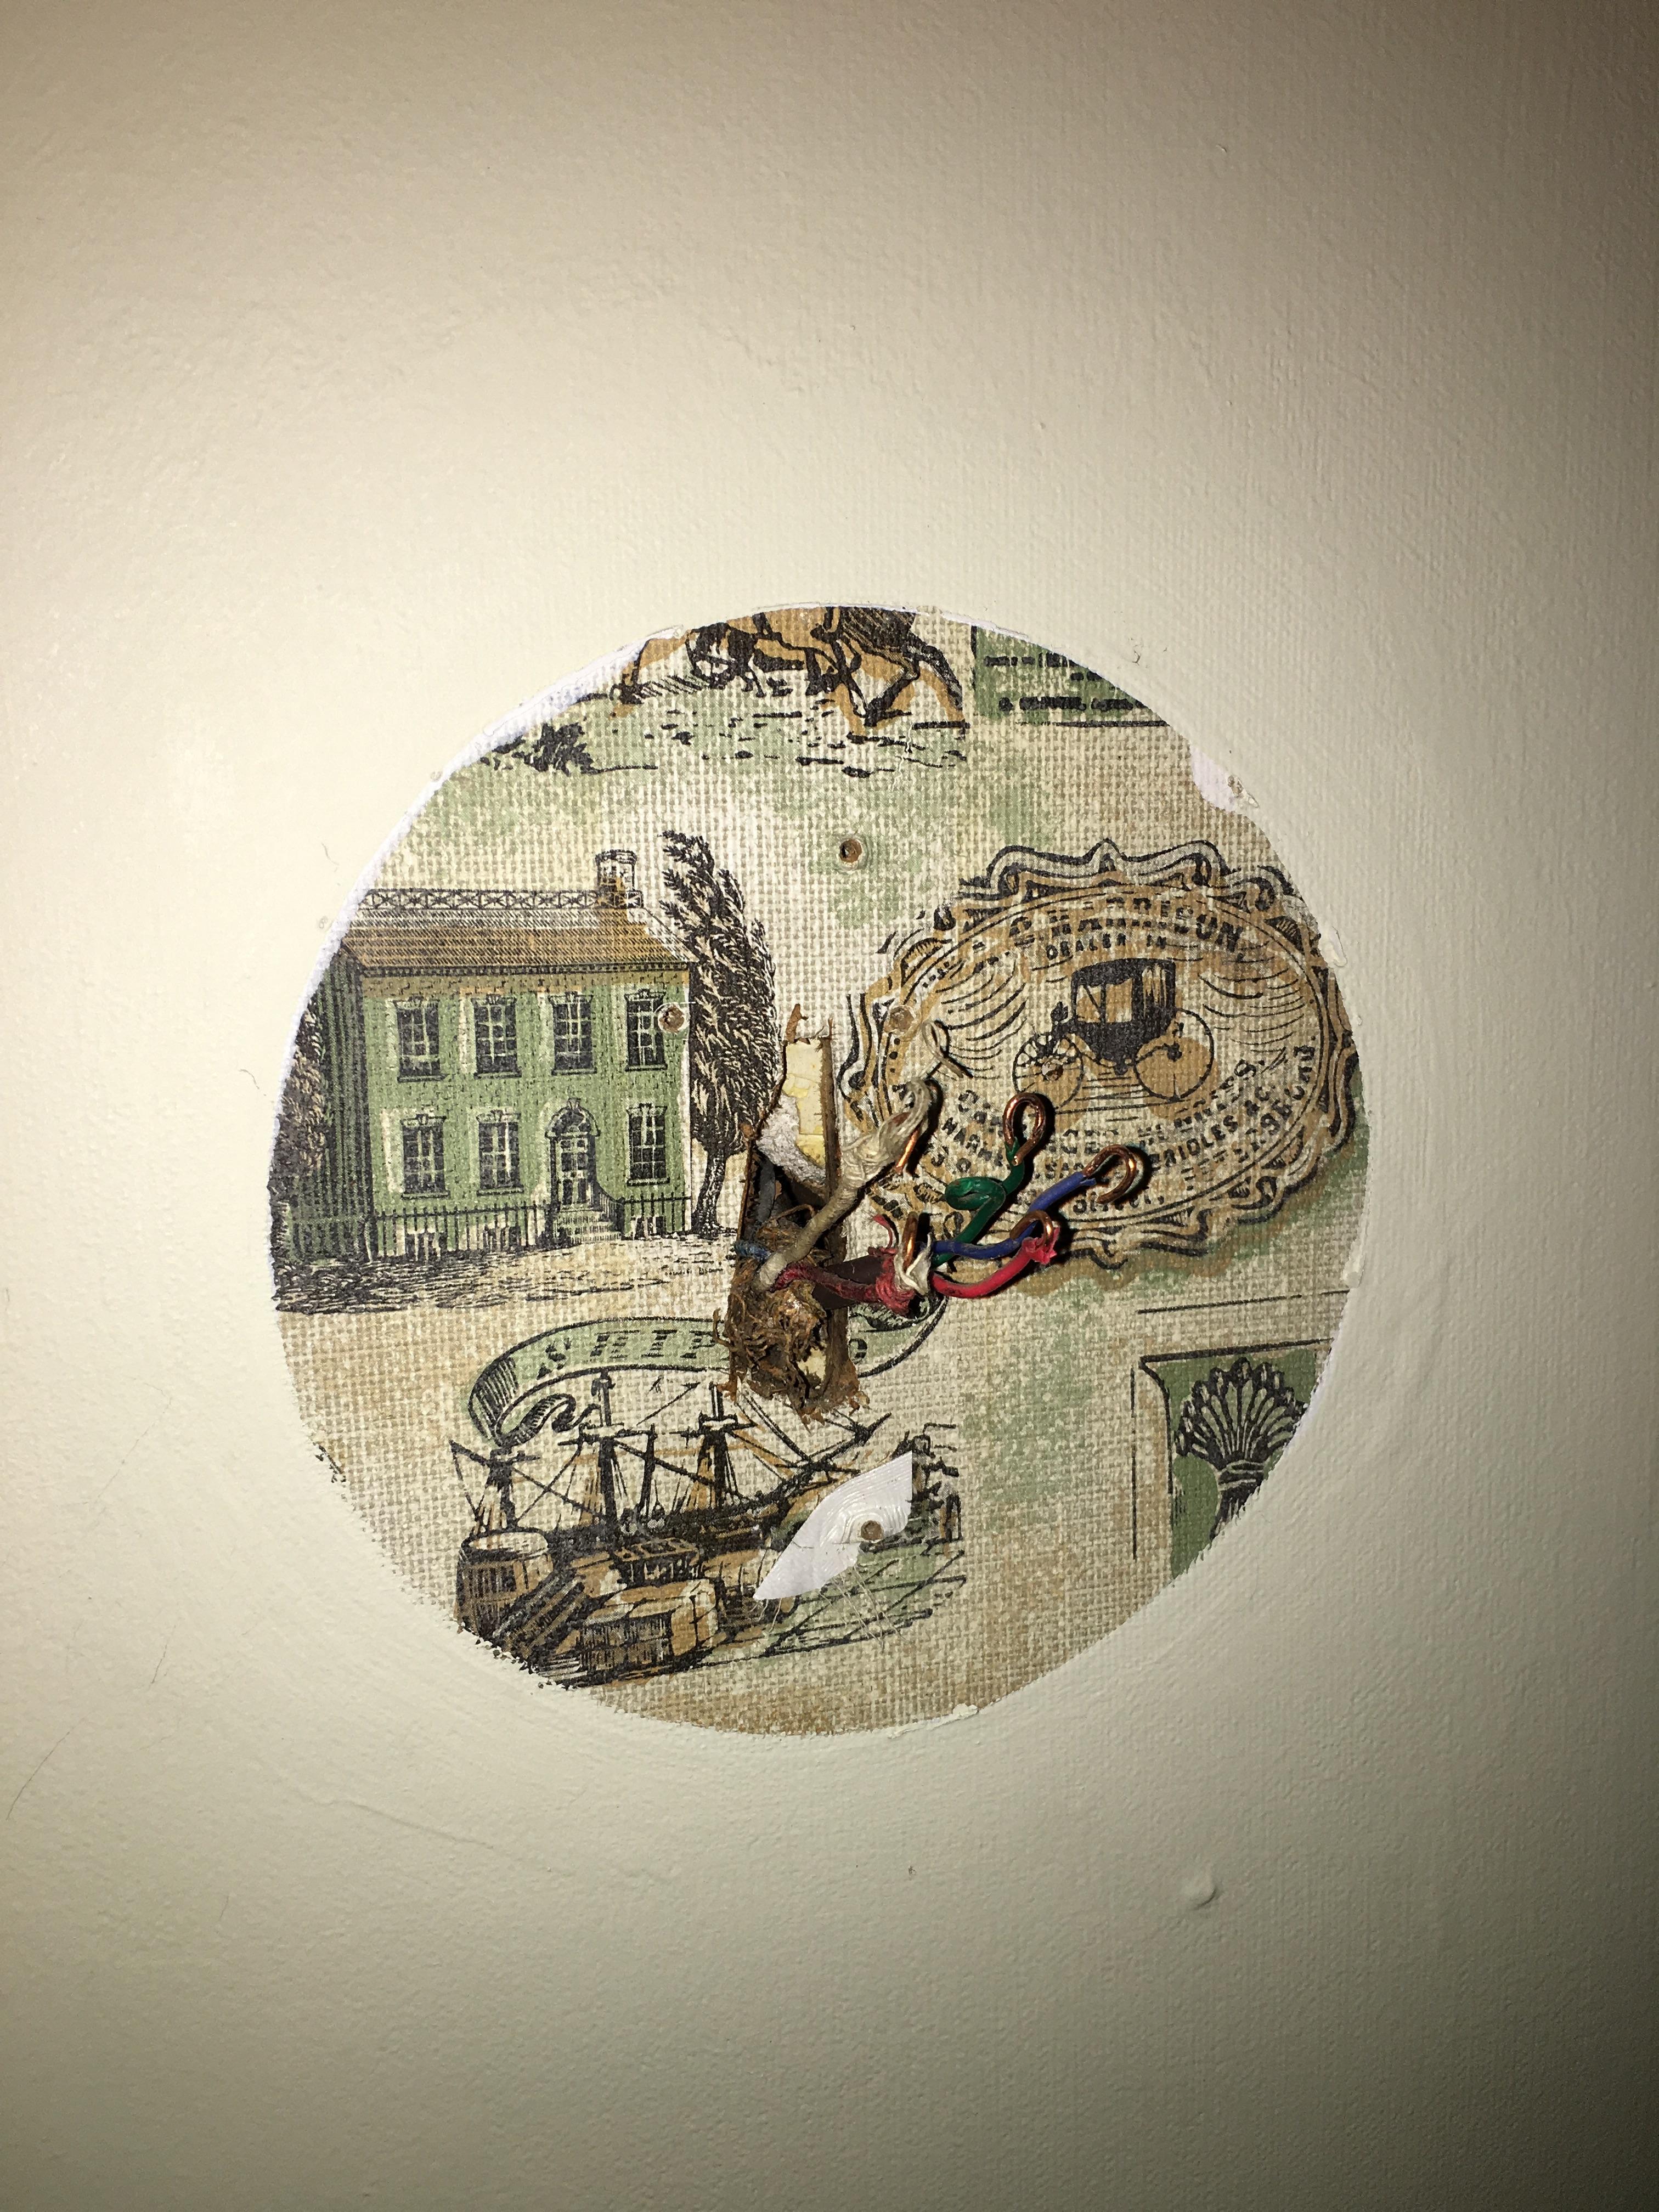 This Original Wallpaper From The 1930s Under A Thermostat